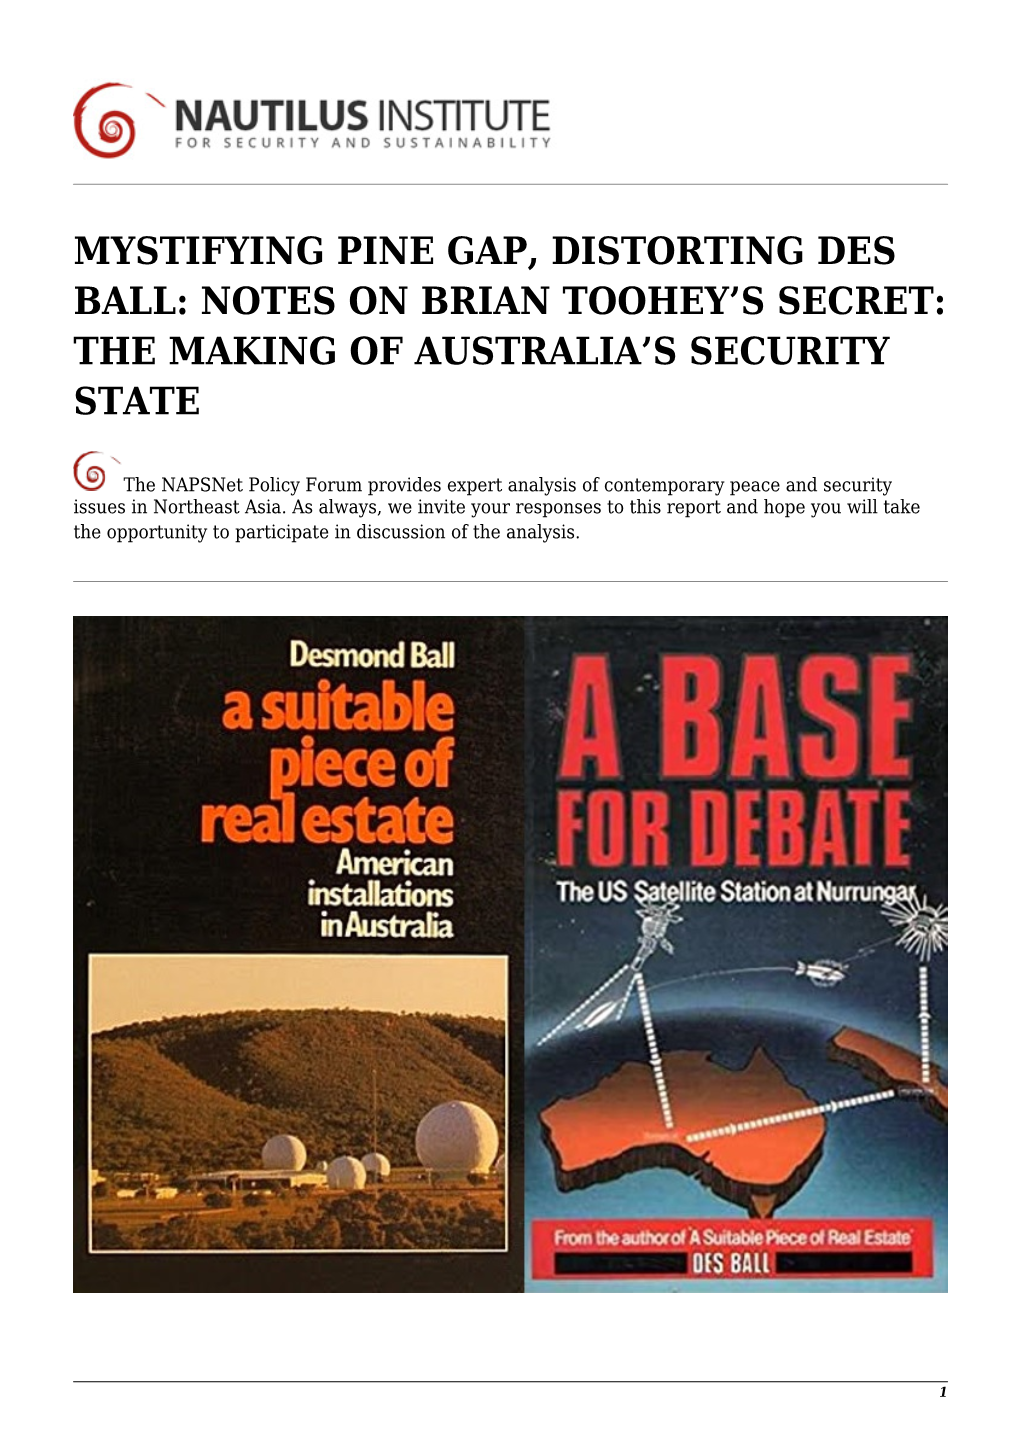 Mystifying Pine Gap, Distorting Des Ball: Notes on Brian Toohey’S Secret: the Making of Australia’S Security State